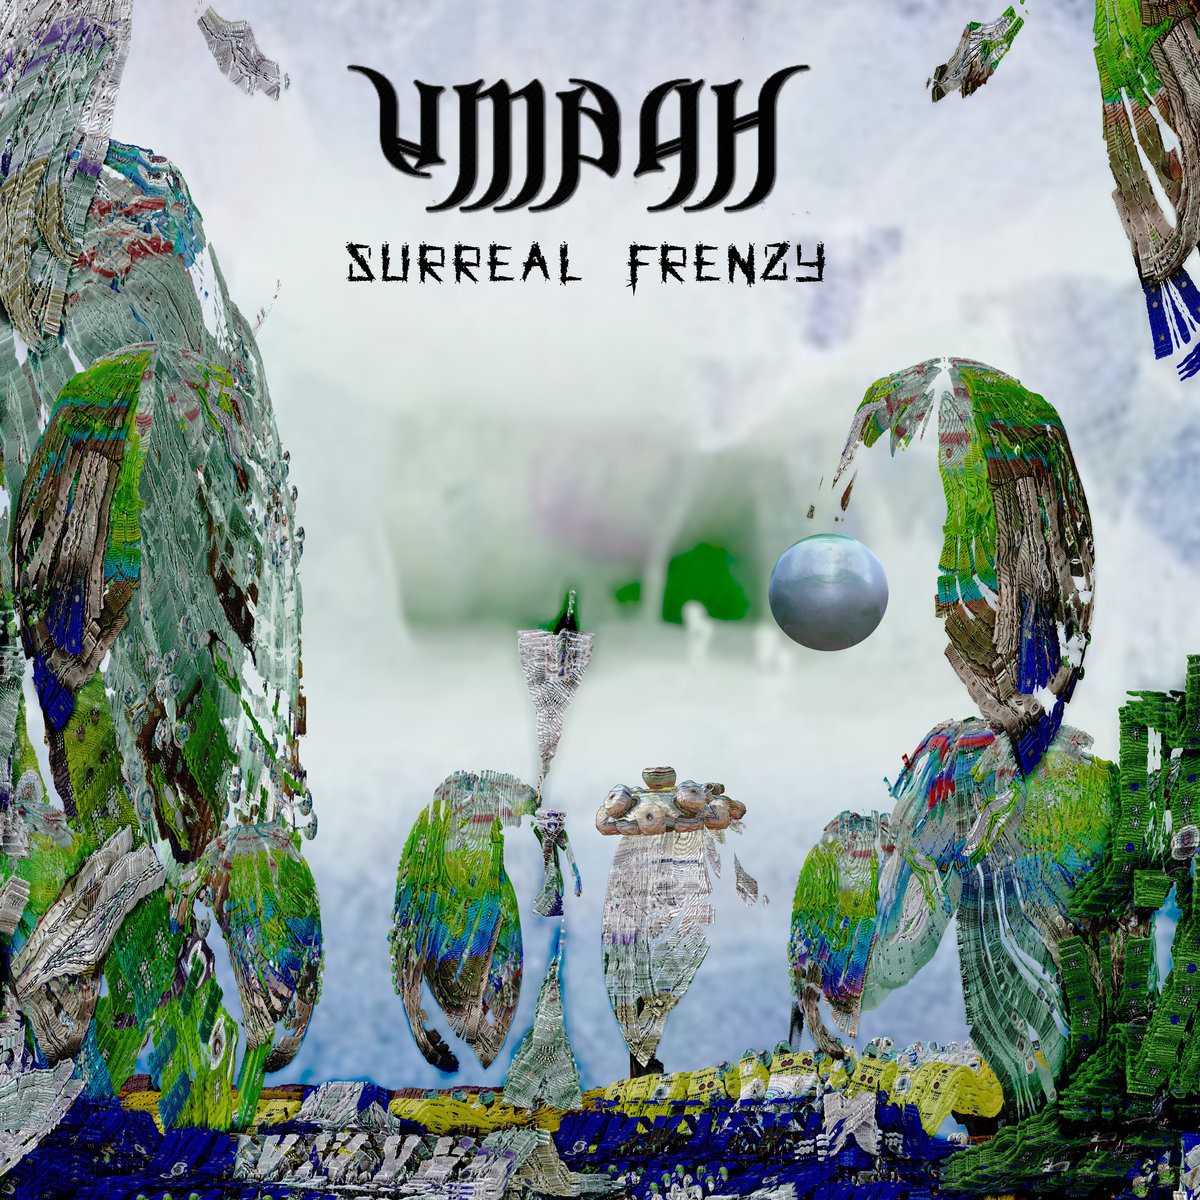 UMBAH - Surreal Frenzy cover 